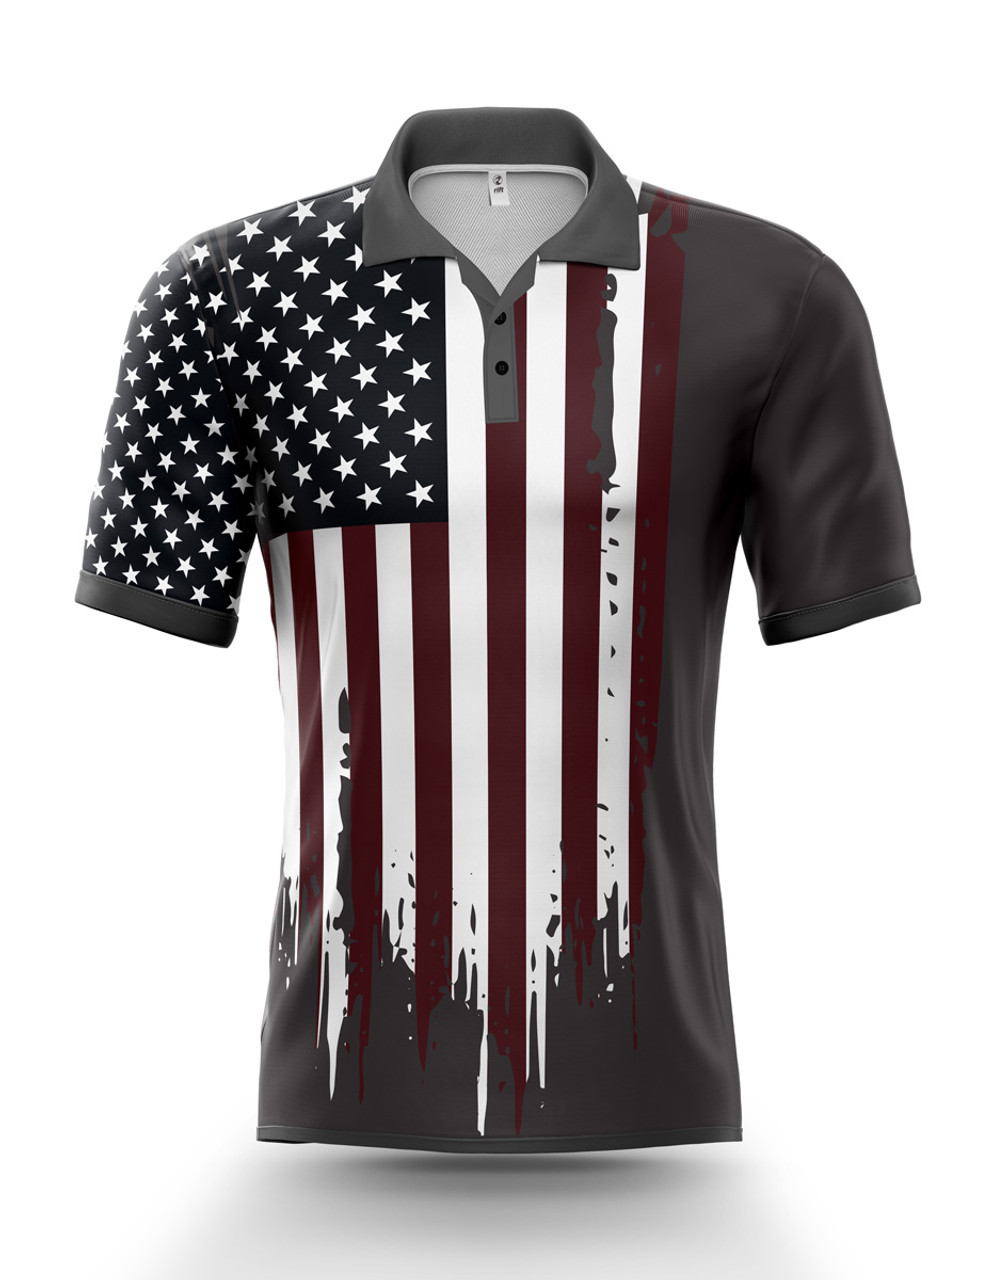 Blacked-Out USA - Rift Apparel